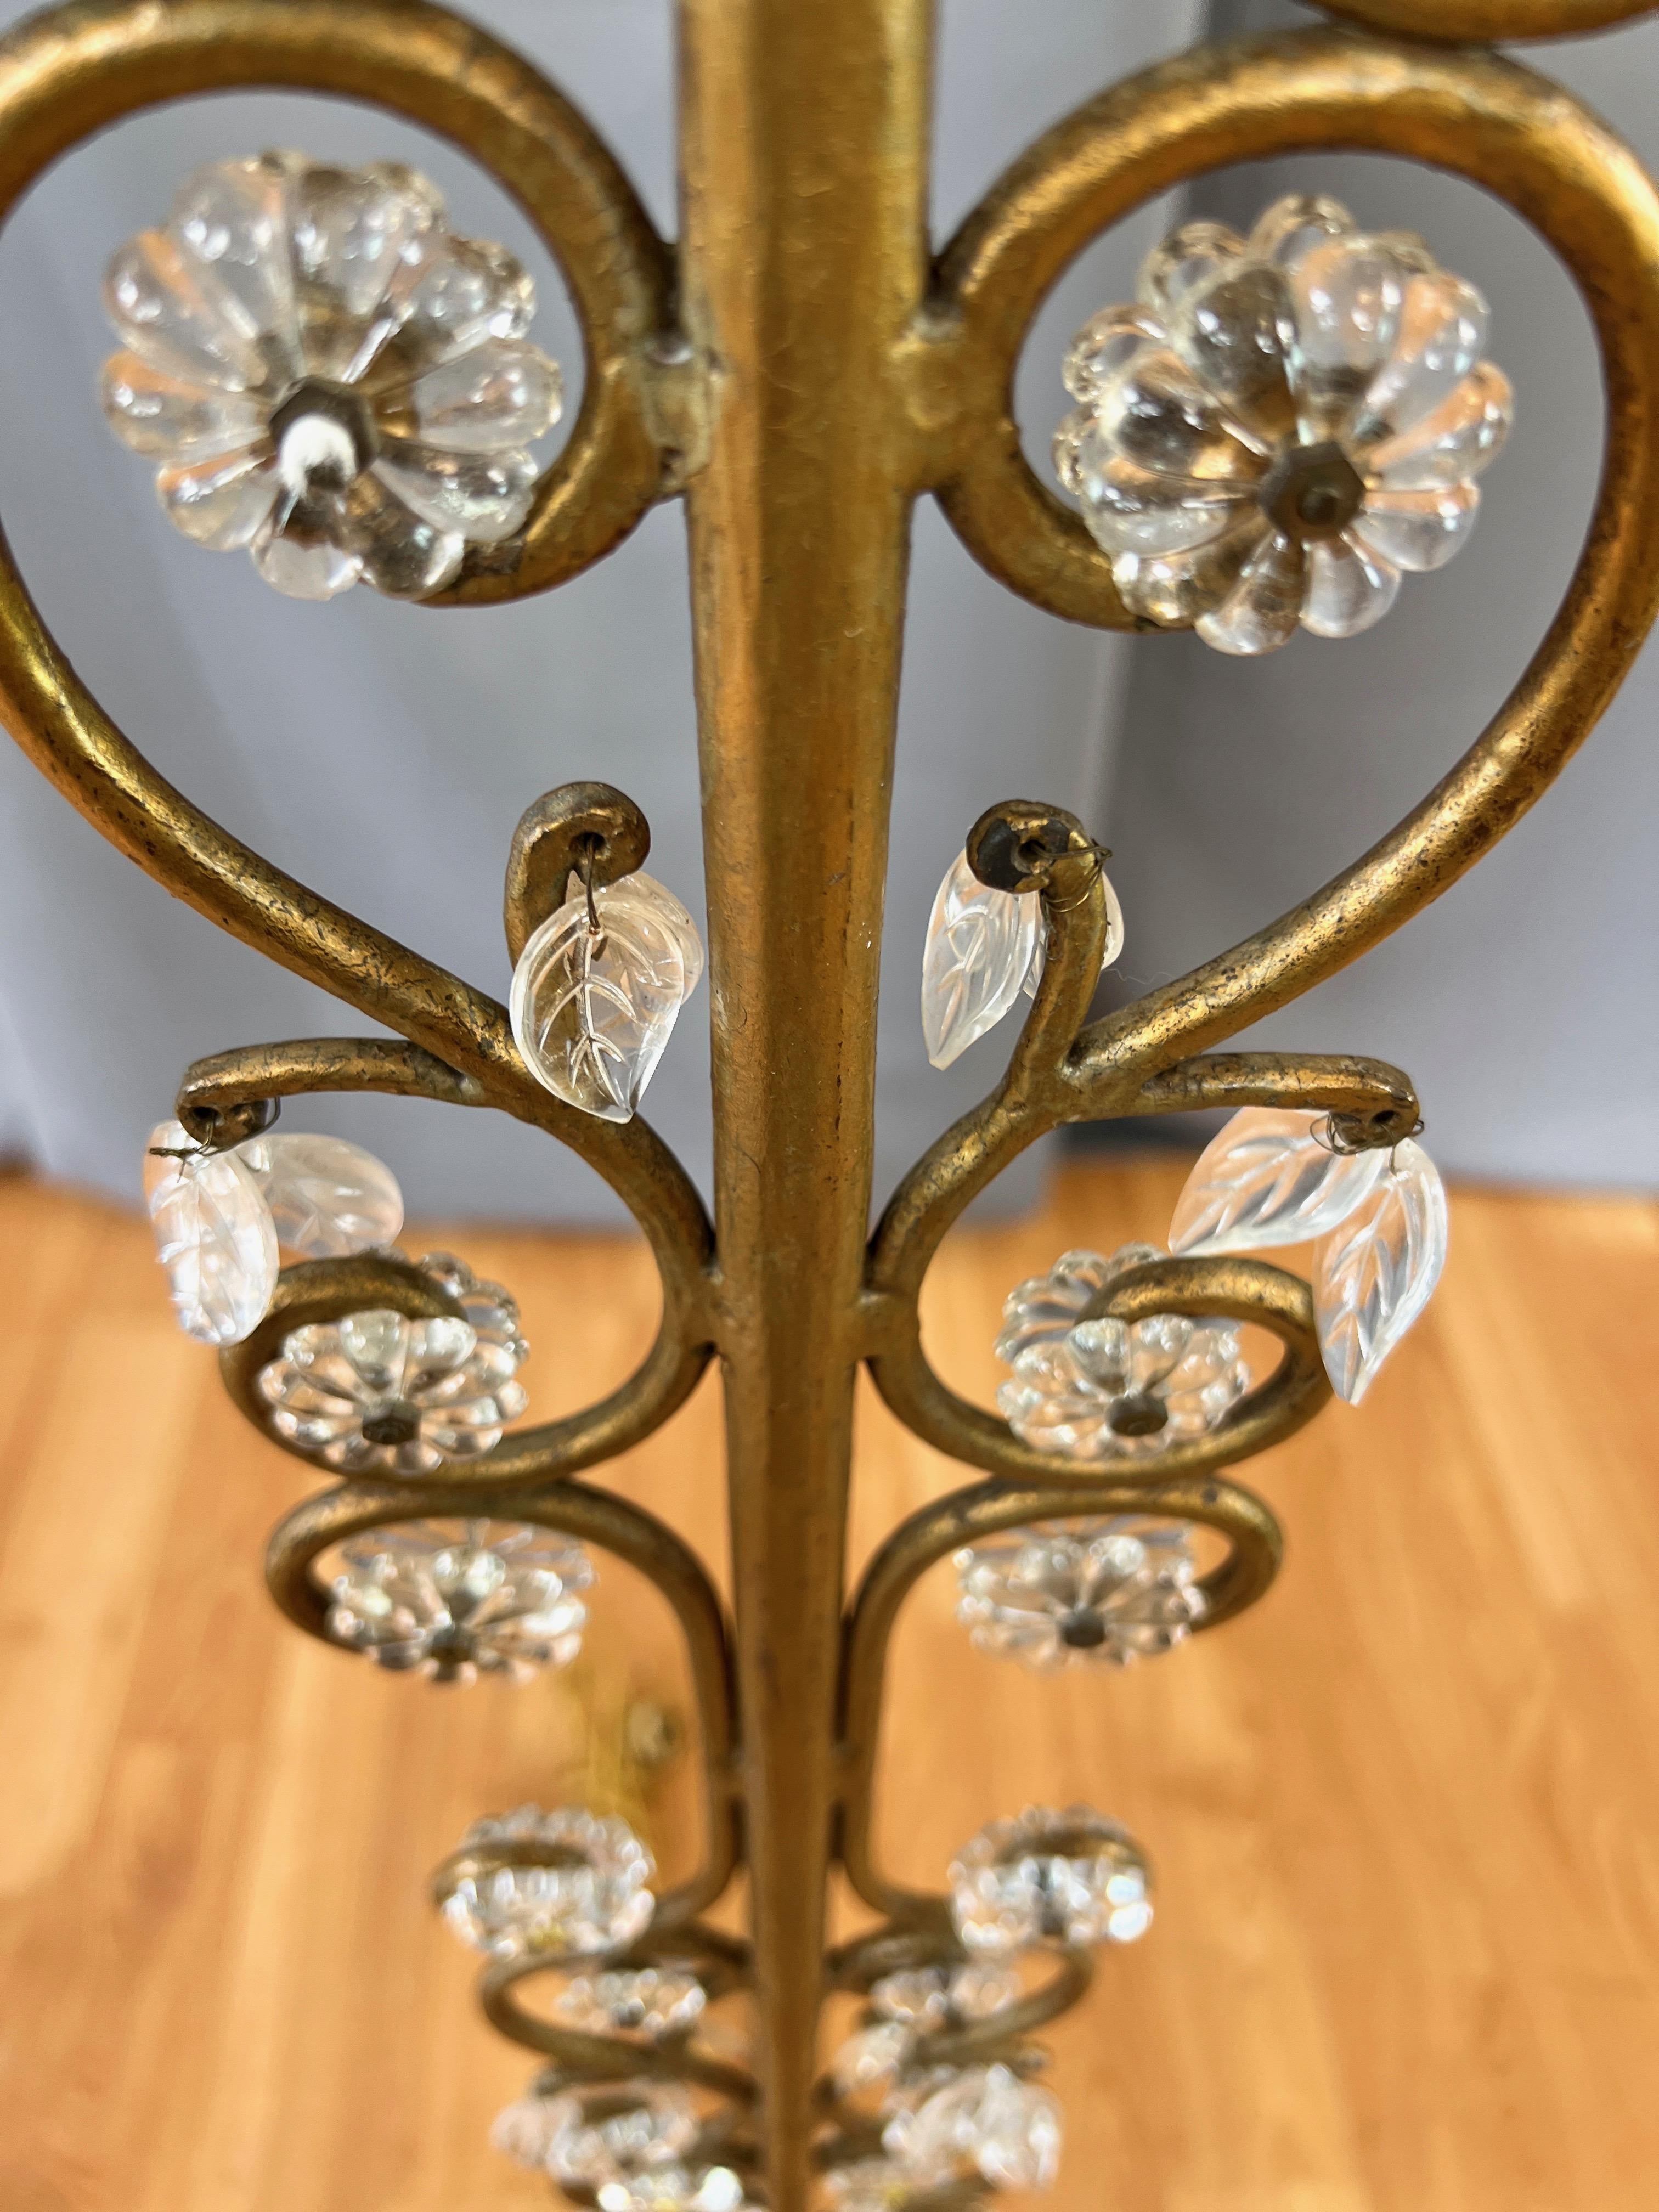 Pair of Italian Gilt Wrought Iron Floor Lamps with Glass Florets & Leaves, 1950s For Sale 7